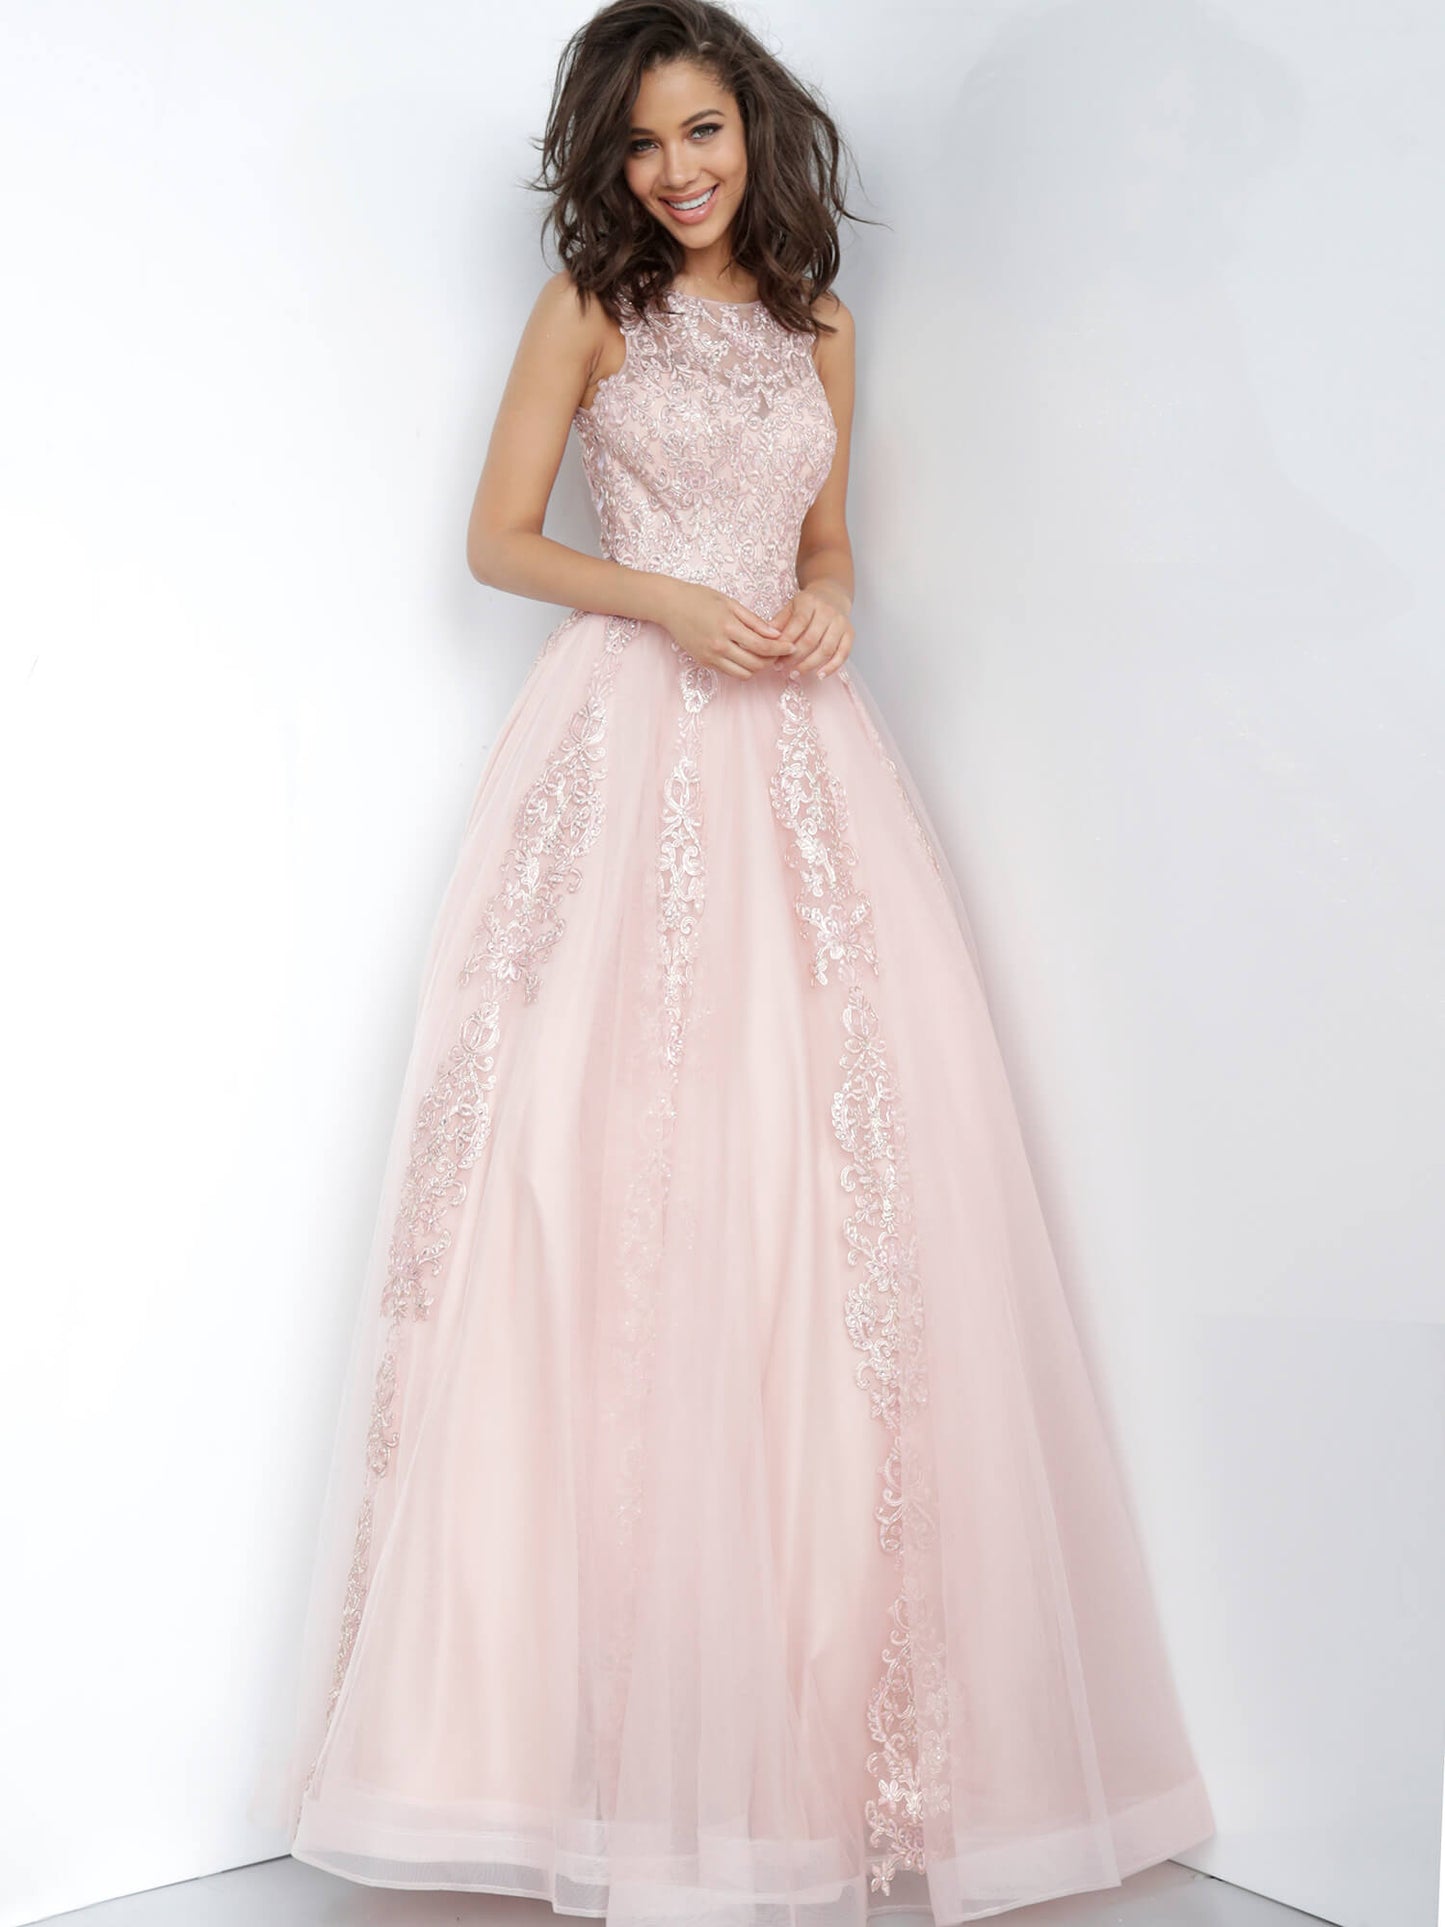 JVN59046 Blush long prom dress with embellished lace applique front and back ball gown evening dress 